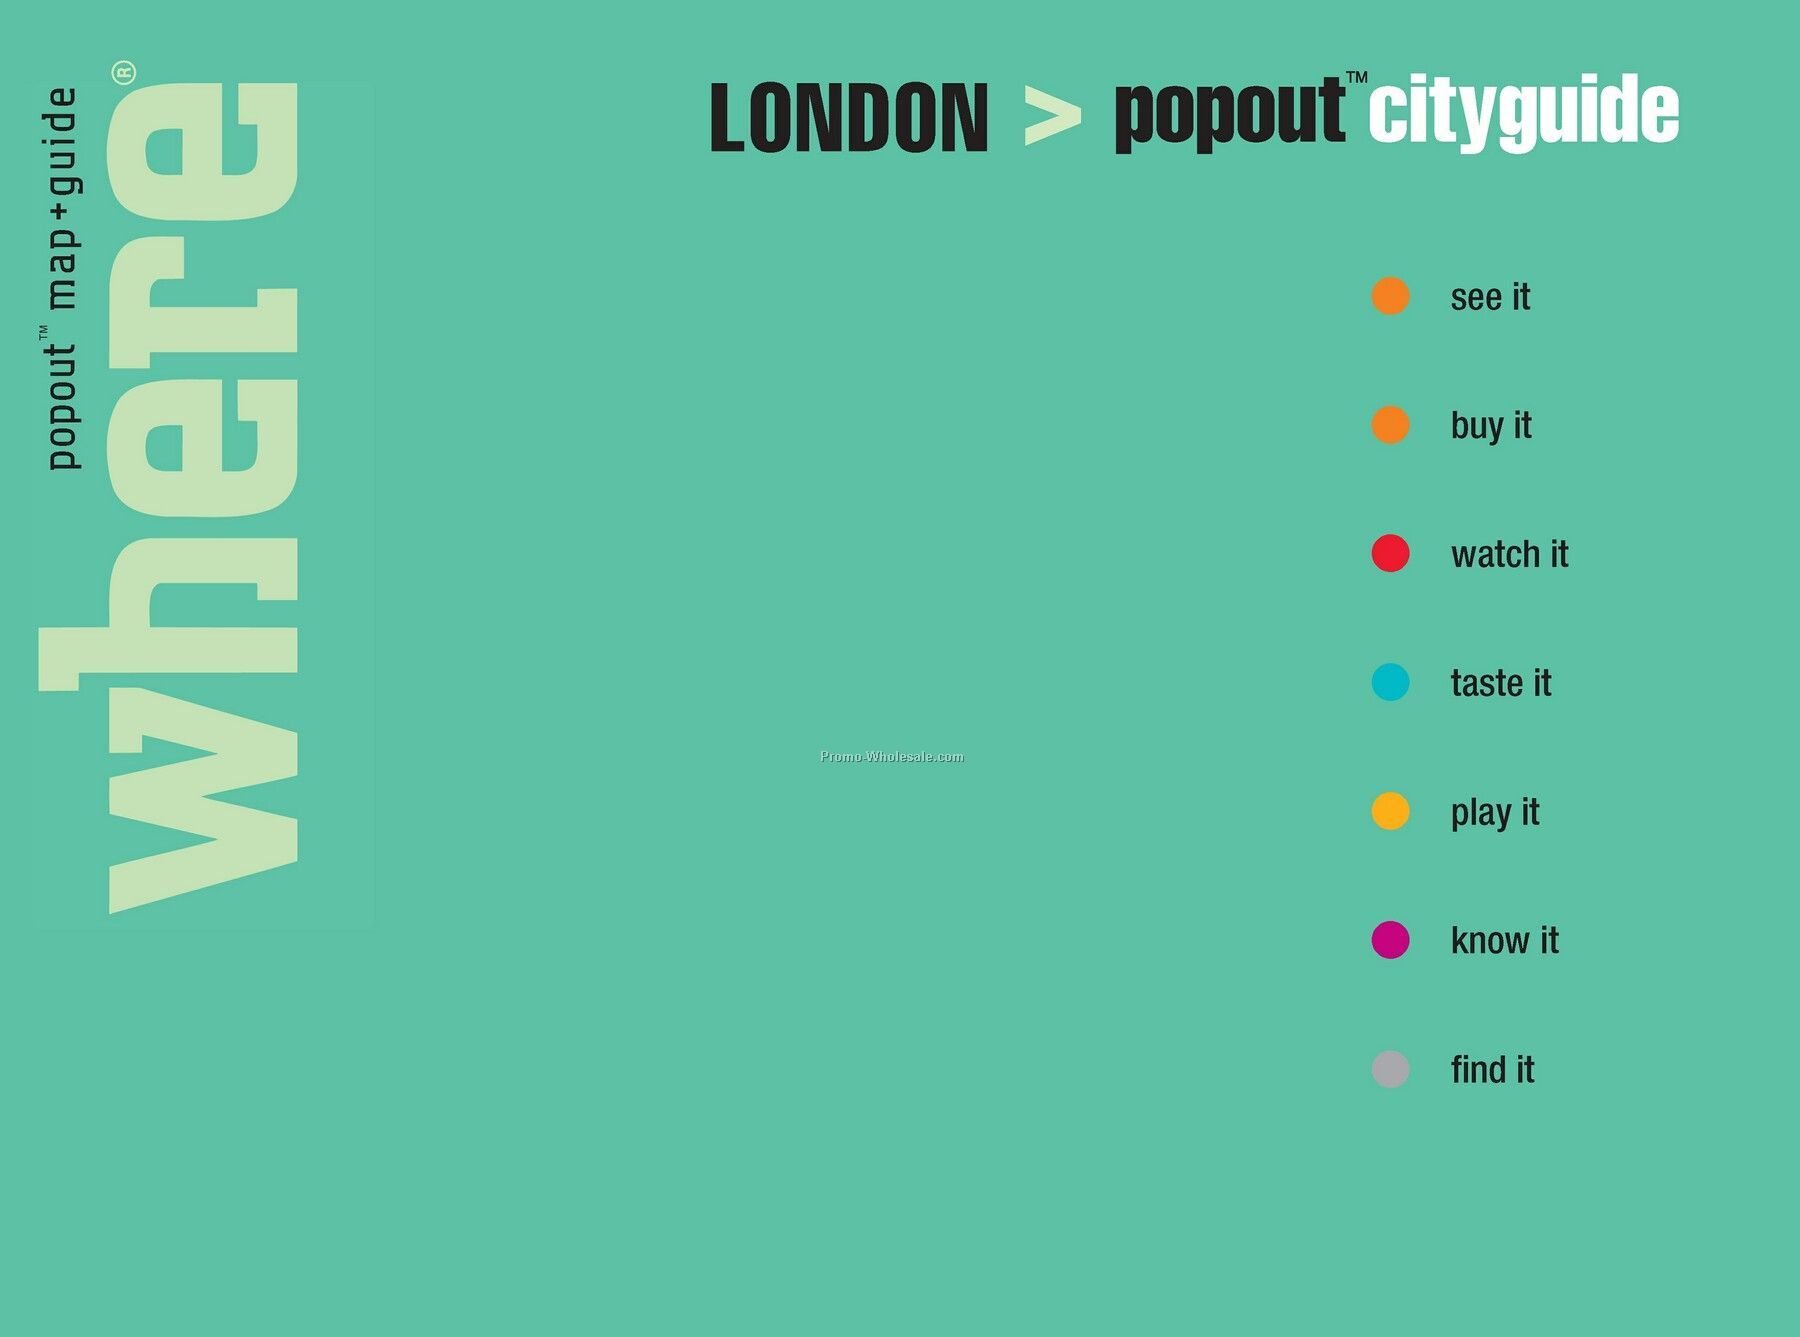 Restaurant Guides - Featuring Popout Maps - City Guide London